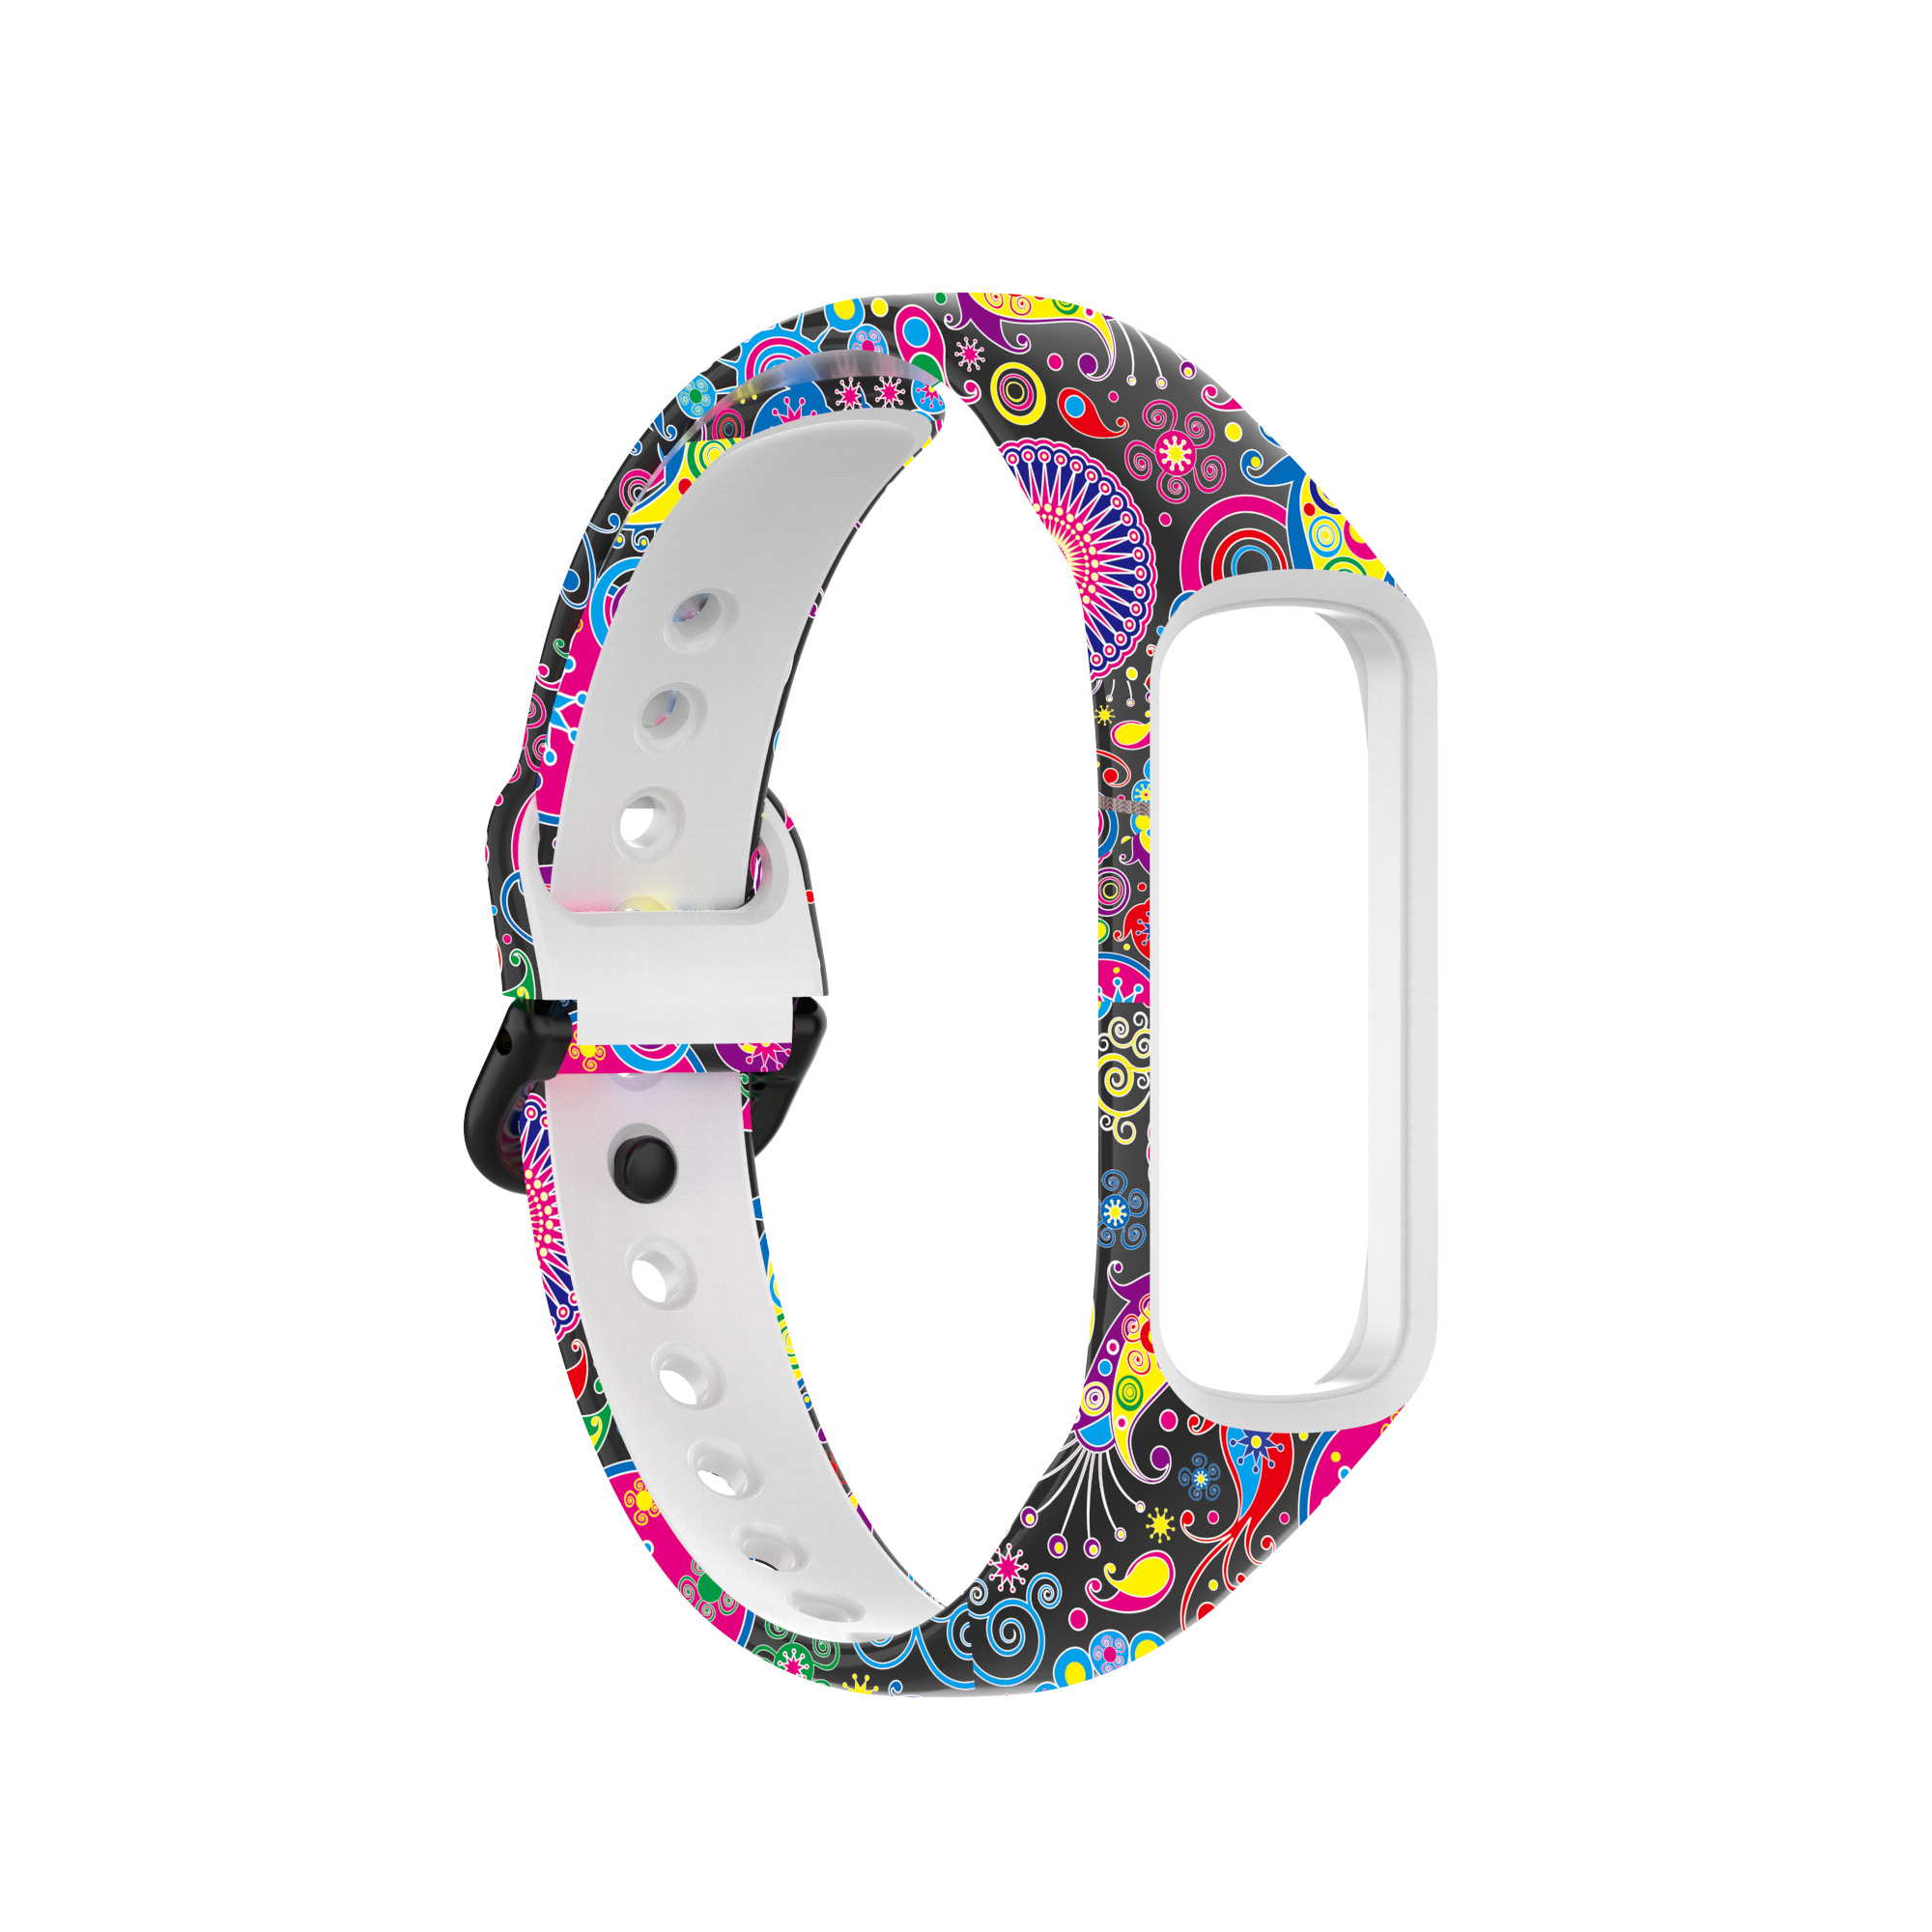 Bakeey-Printed-Pattern-Stainless-Steel-Buckle-Smart-watch-Band-Replacement-Strap-For-Samsung-Galaxy--1806217-10